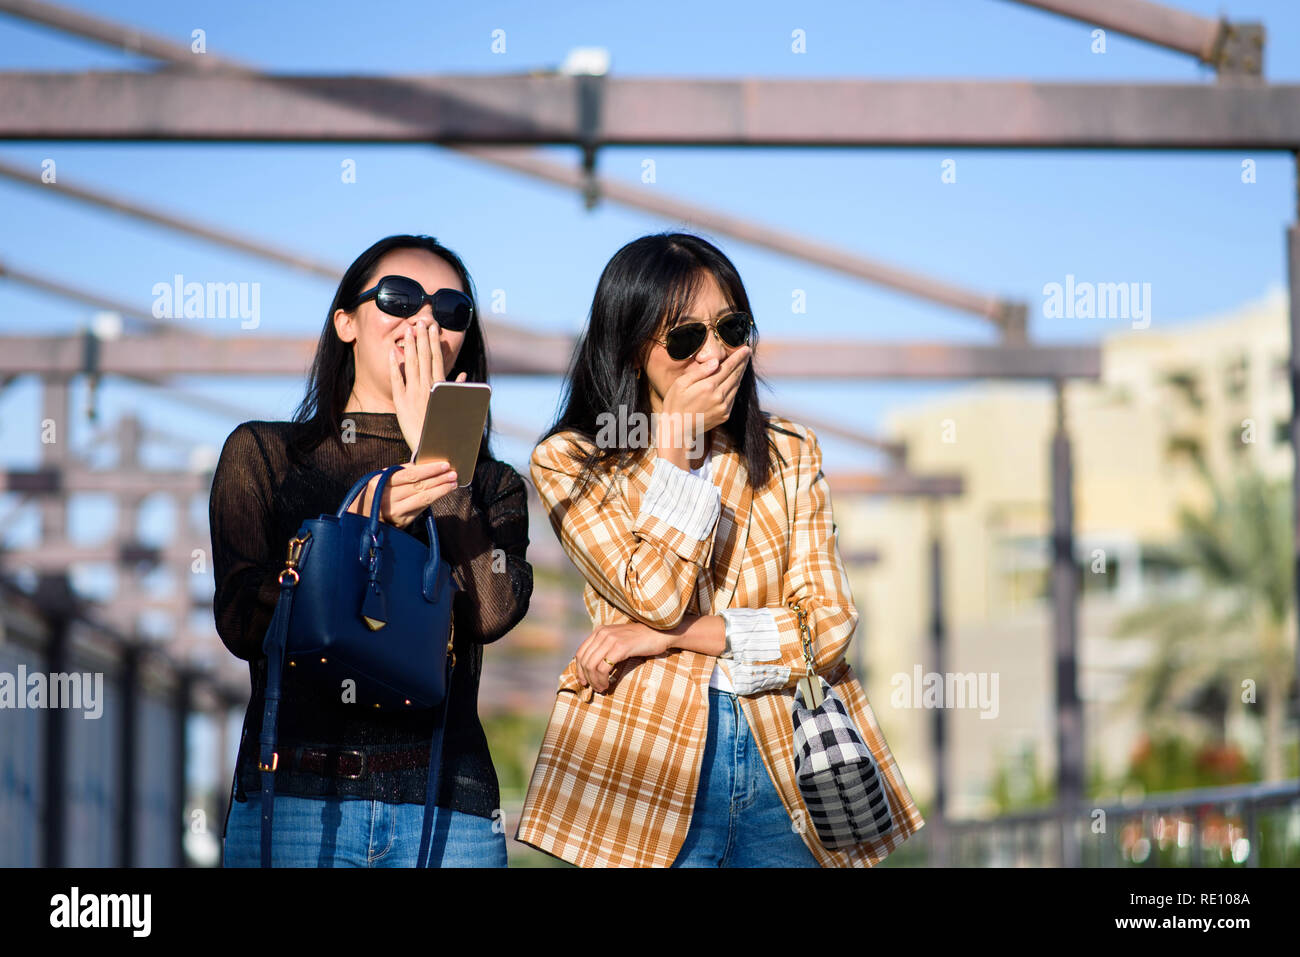 Fashionable girls laughing on the street closeup Stock Photo